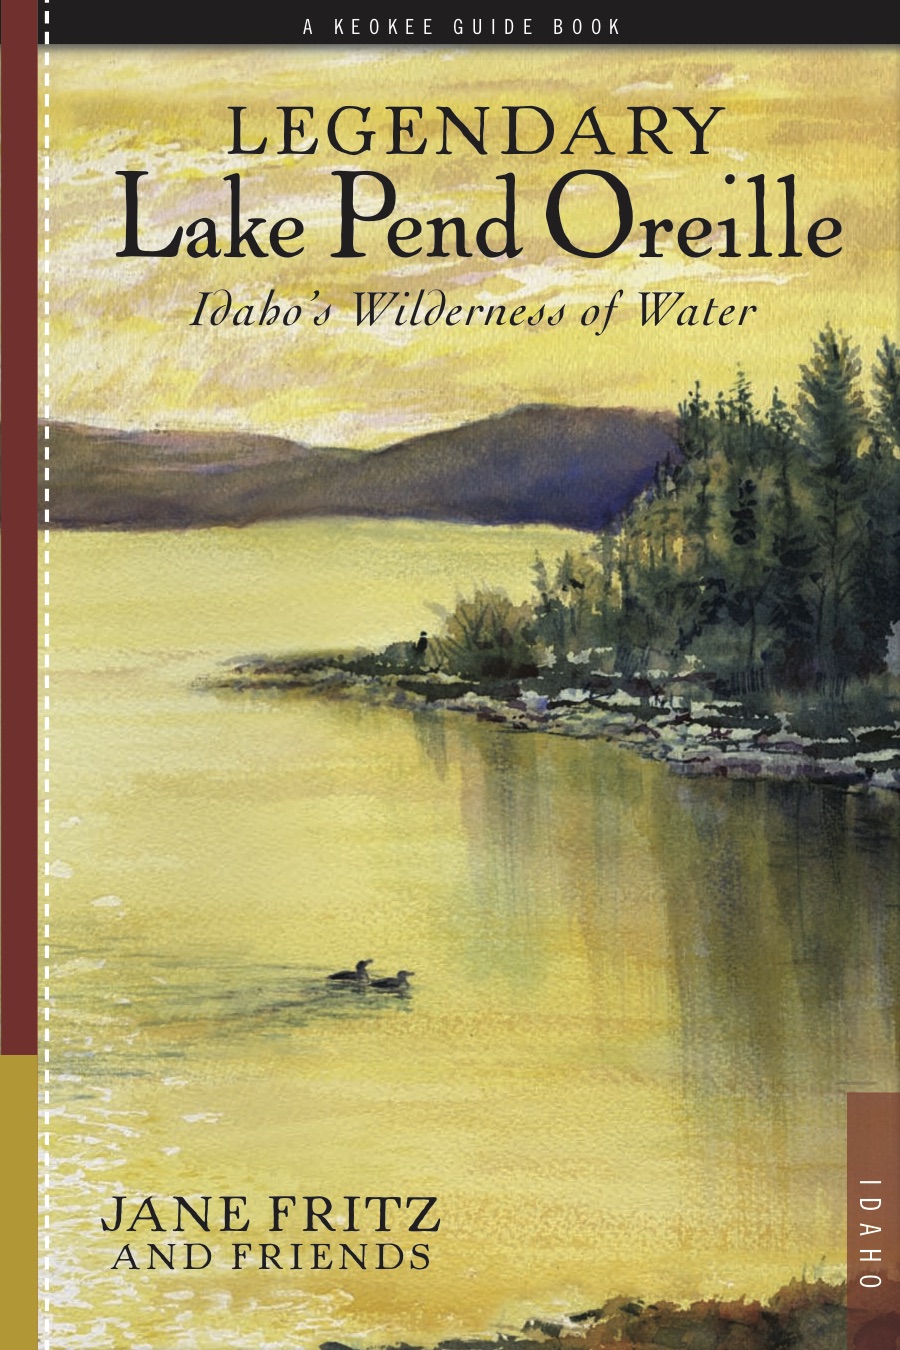 Legendary Lake Pend Oreille: Idaho's wilderness of water (book cover)